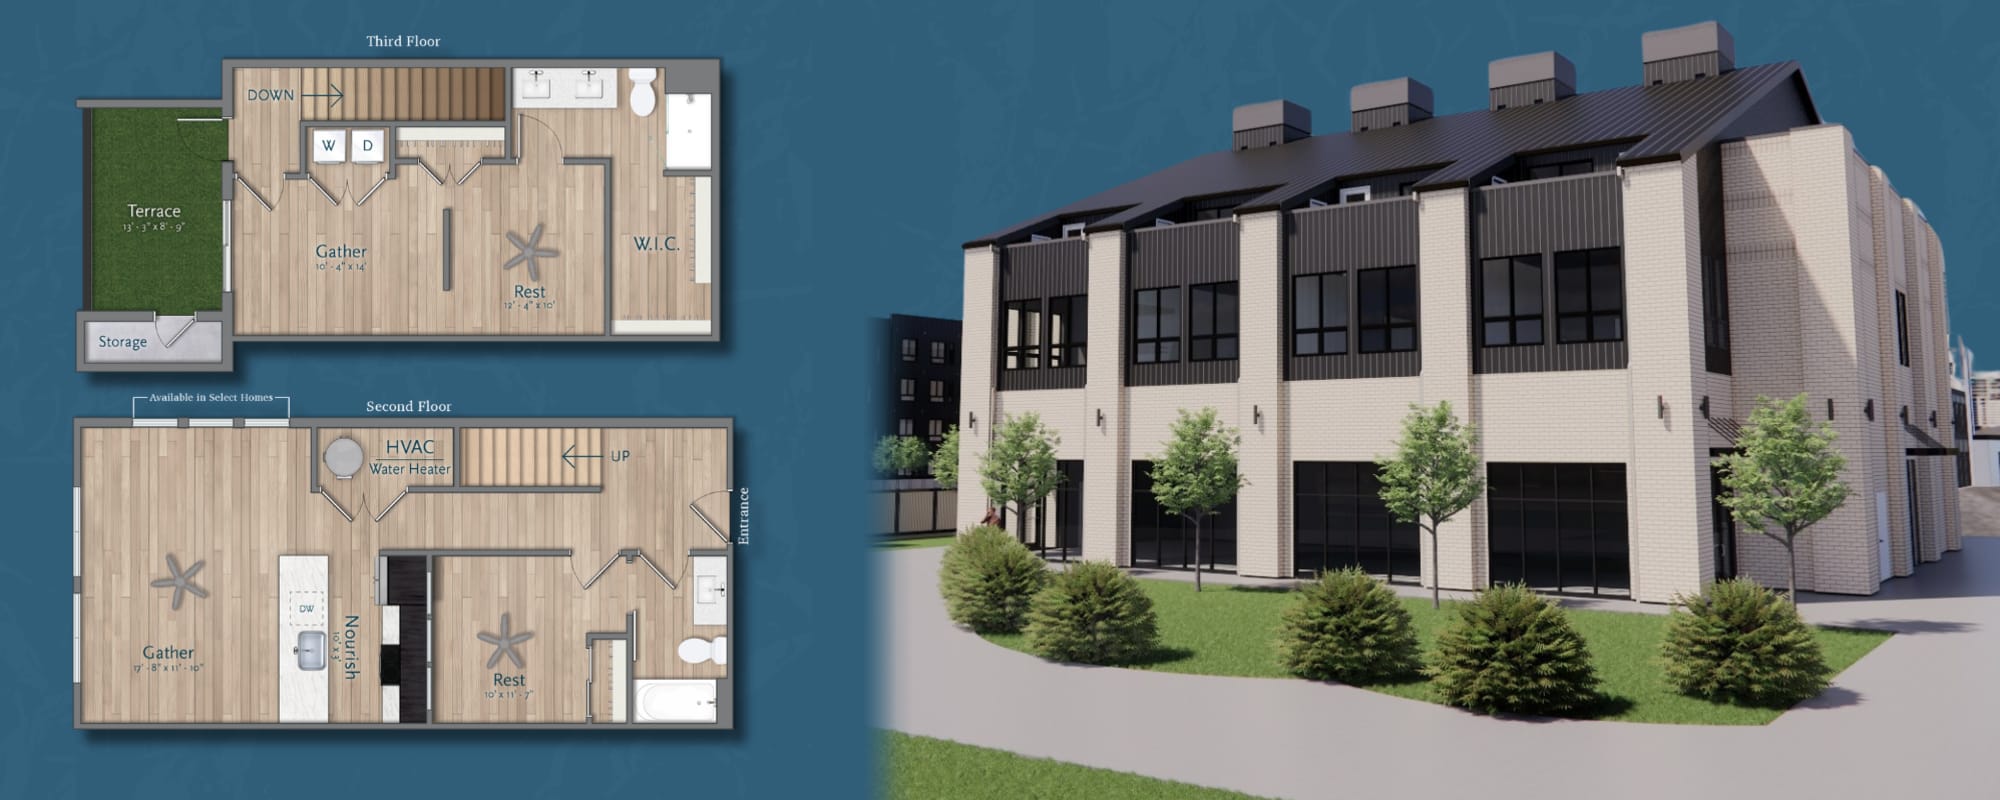 Jackpot Townhome Floor Plan at Factory 52 Apartments in Norwood, OH 